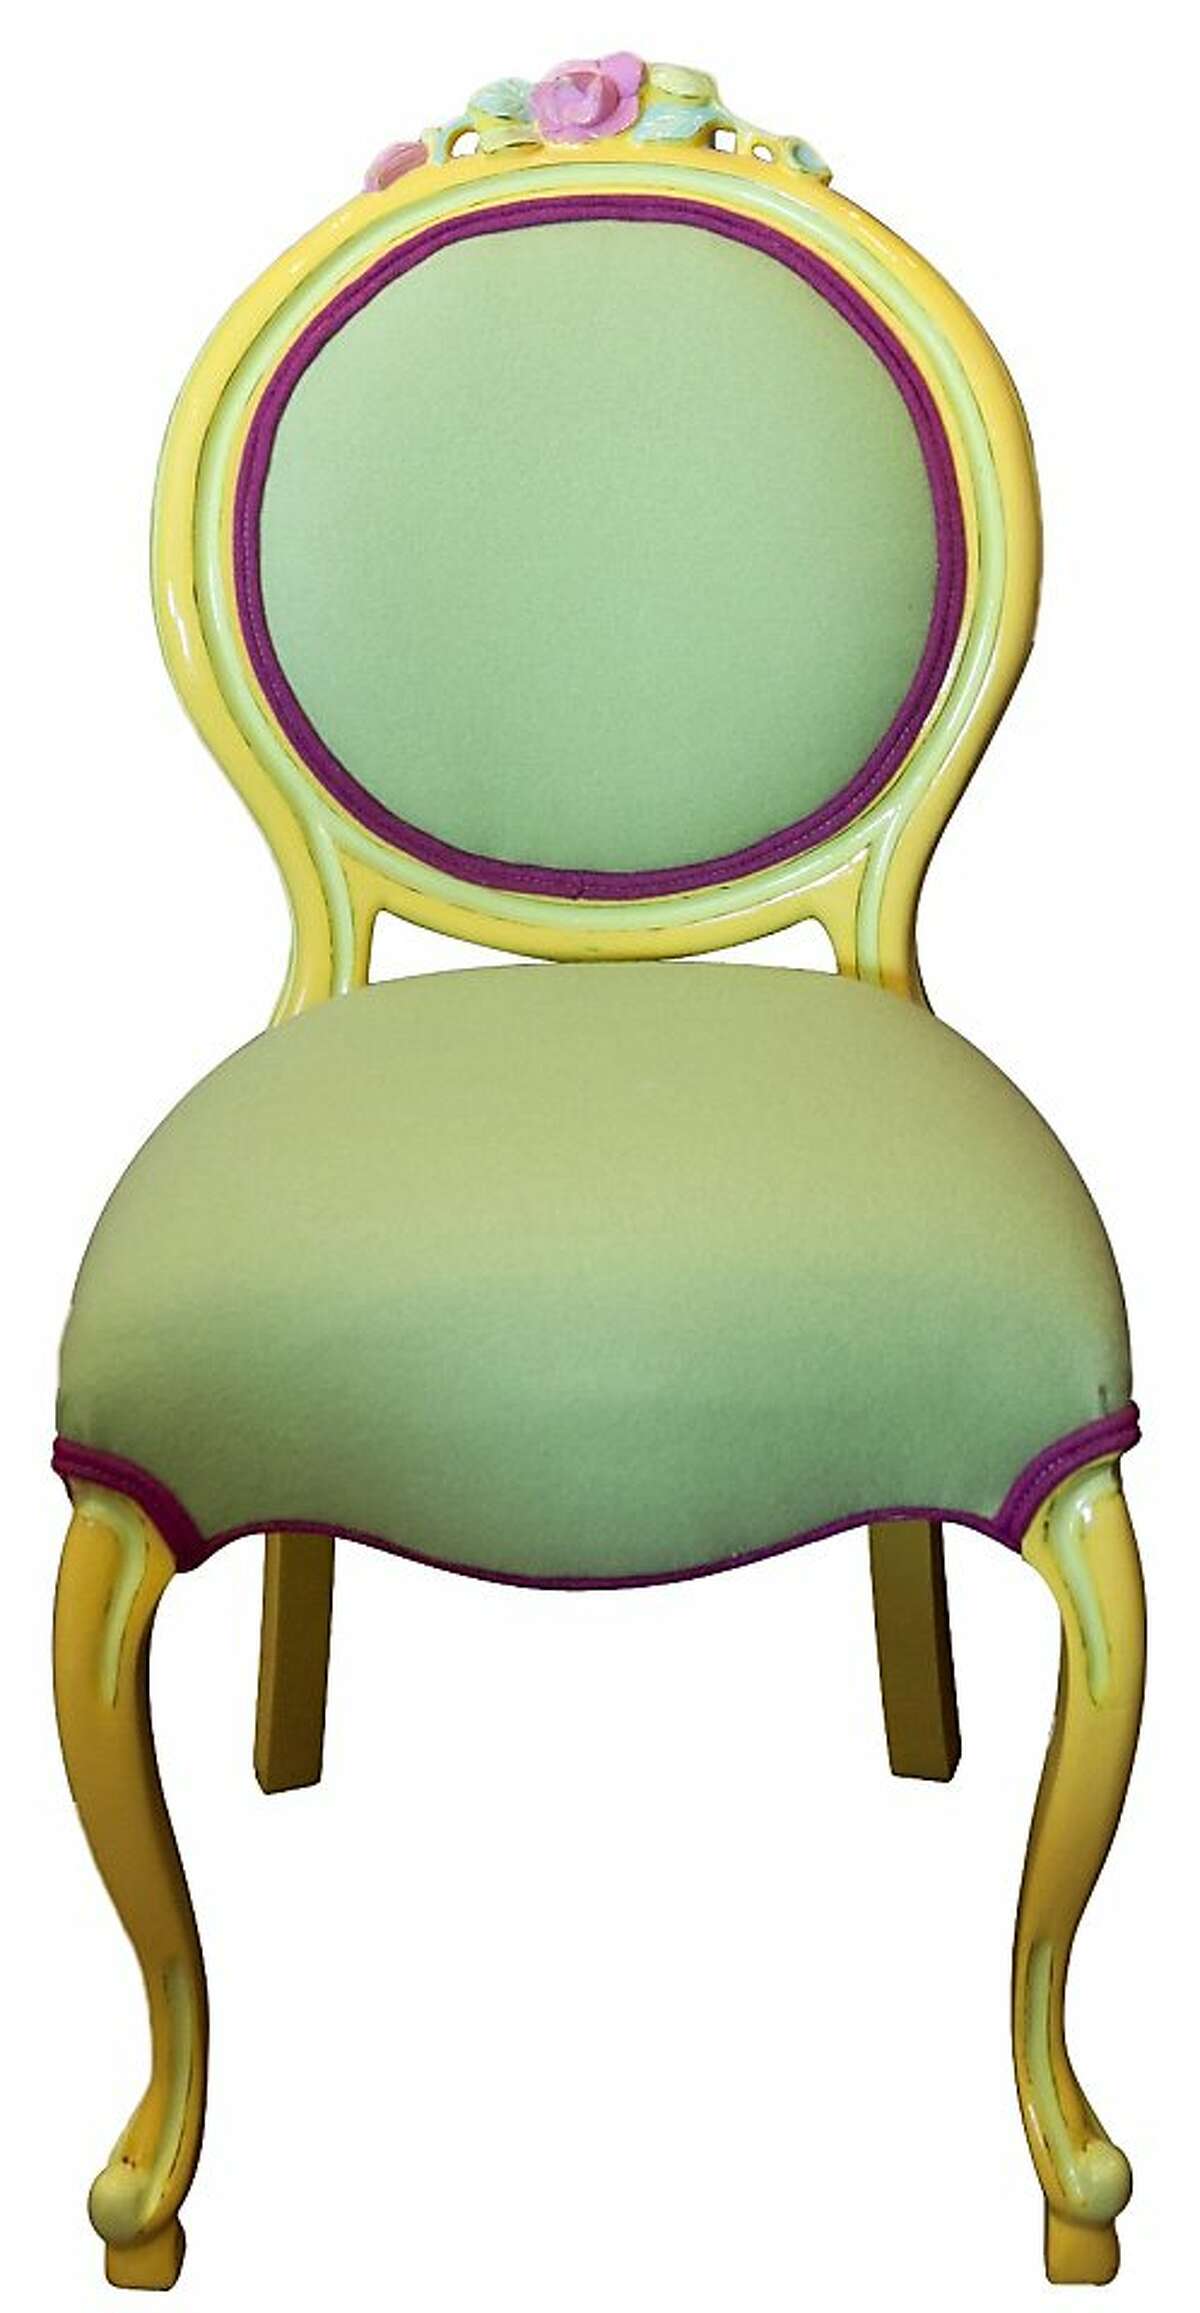 Furniture restoration expert Carolyn Pickell (not pictured) partnered with Cypress Furniture to refurbish the sherbert colored french style chair (Pickell painted it in lemon yellow, lime green and cotton candy pink while Cypress Furniture reuphostered the chair in matching lime green felt with fuscia trim). Above the chair is a mid-century lamb Pickell rewired, painted and topped off with an Edison bulb. On the left is a nightstand she painted, distressed the added a hand painted bird drawer pull while on the right stands a vintage telephone table she painted purple. Peeking through the flip top buffet is a work-in-progress while a teal painted turned leg table holds vintage books, a nest and feather baby owl in her shop, Side Furniture on San Pablo Av